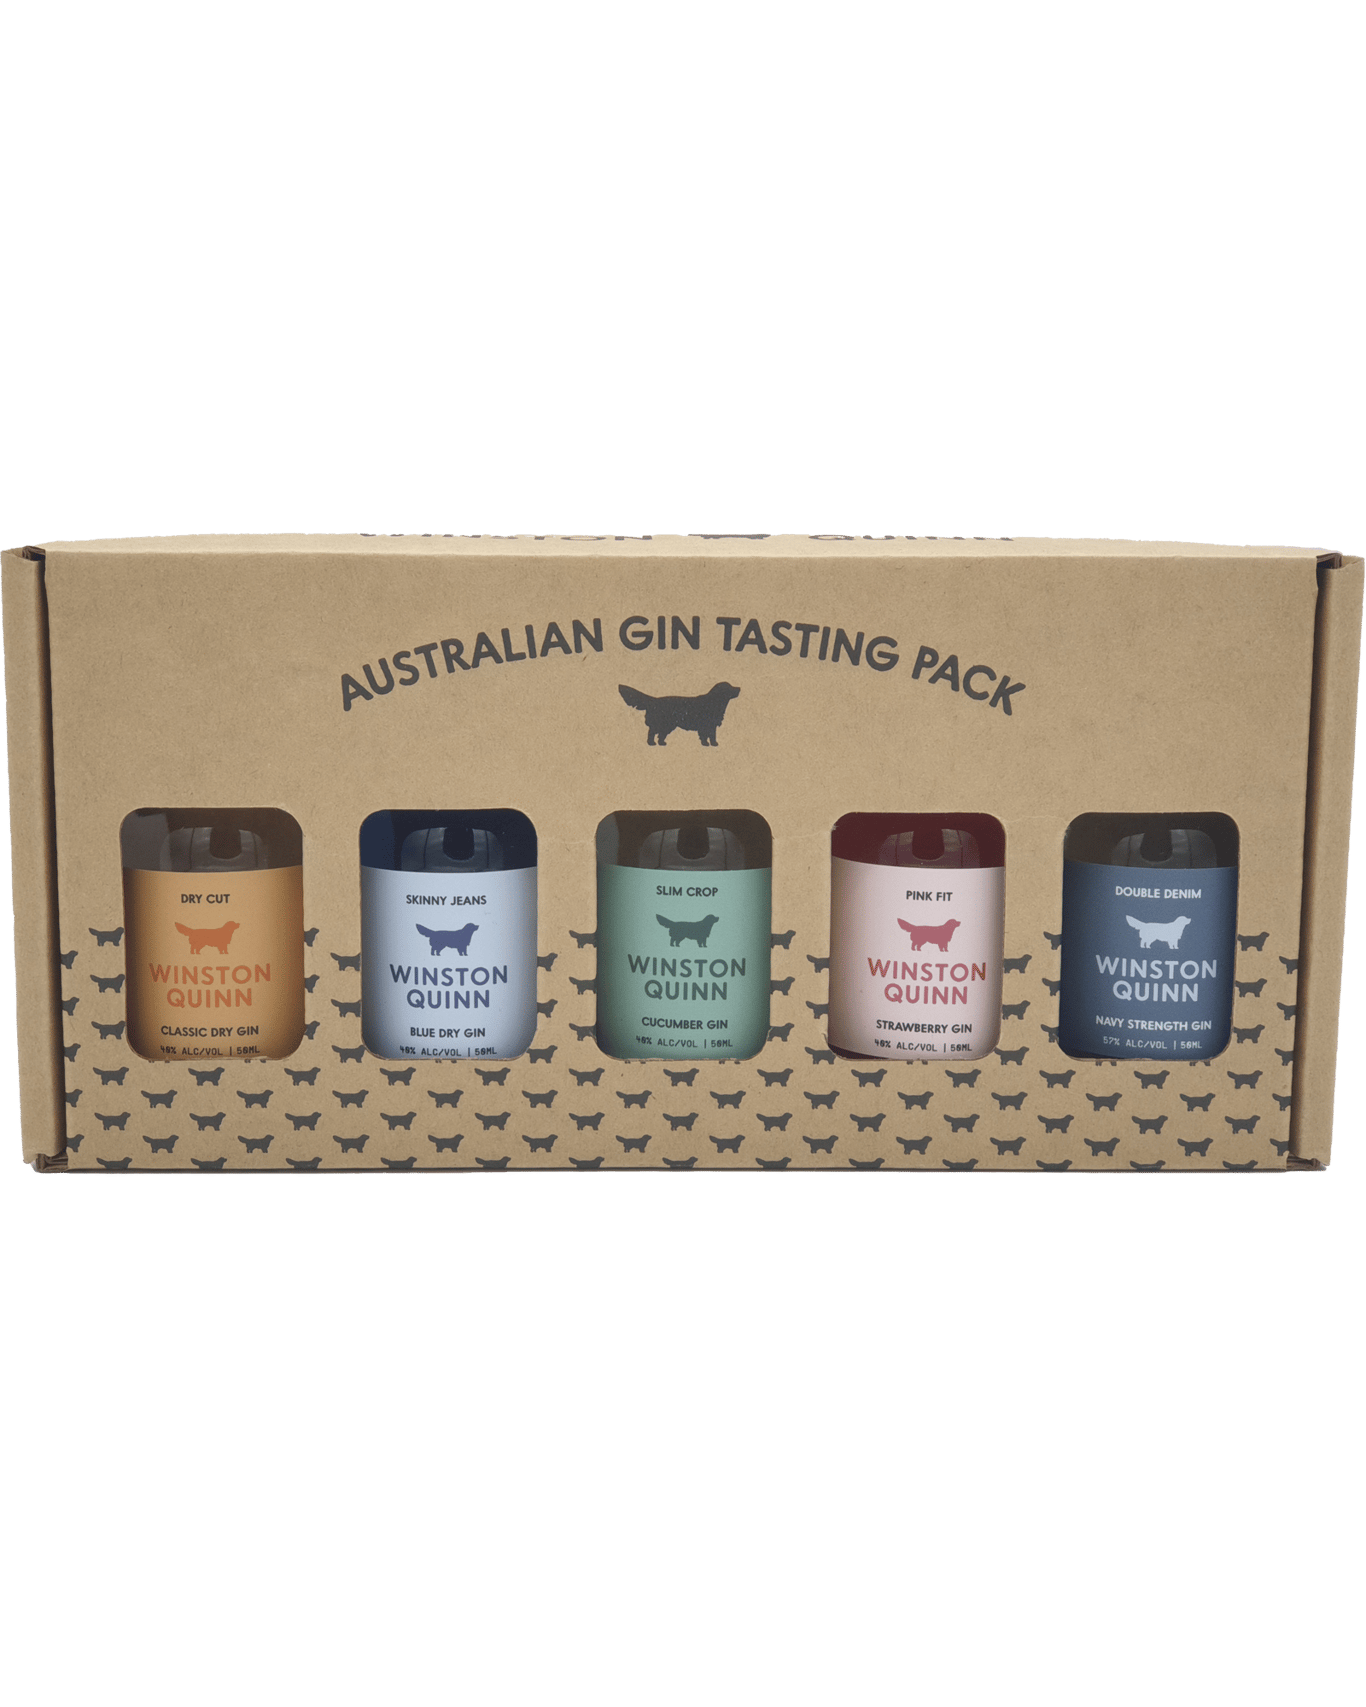 Winston Quinn Gin 5x50ml Tasting Pack Unbeatable Prices Buy Online Best Deals With Delivery